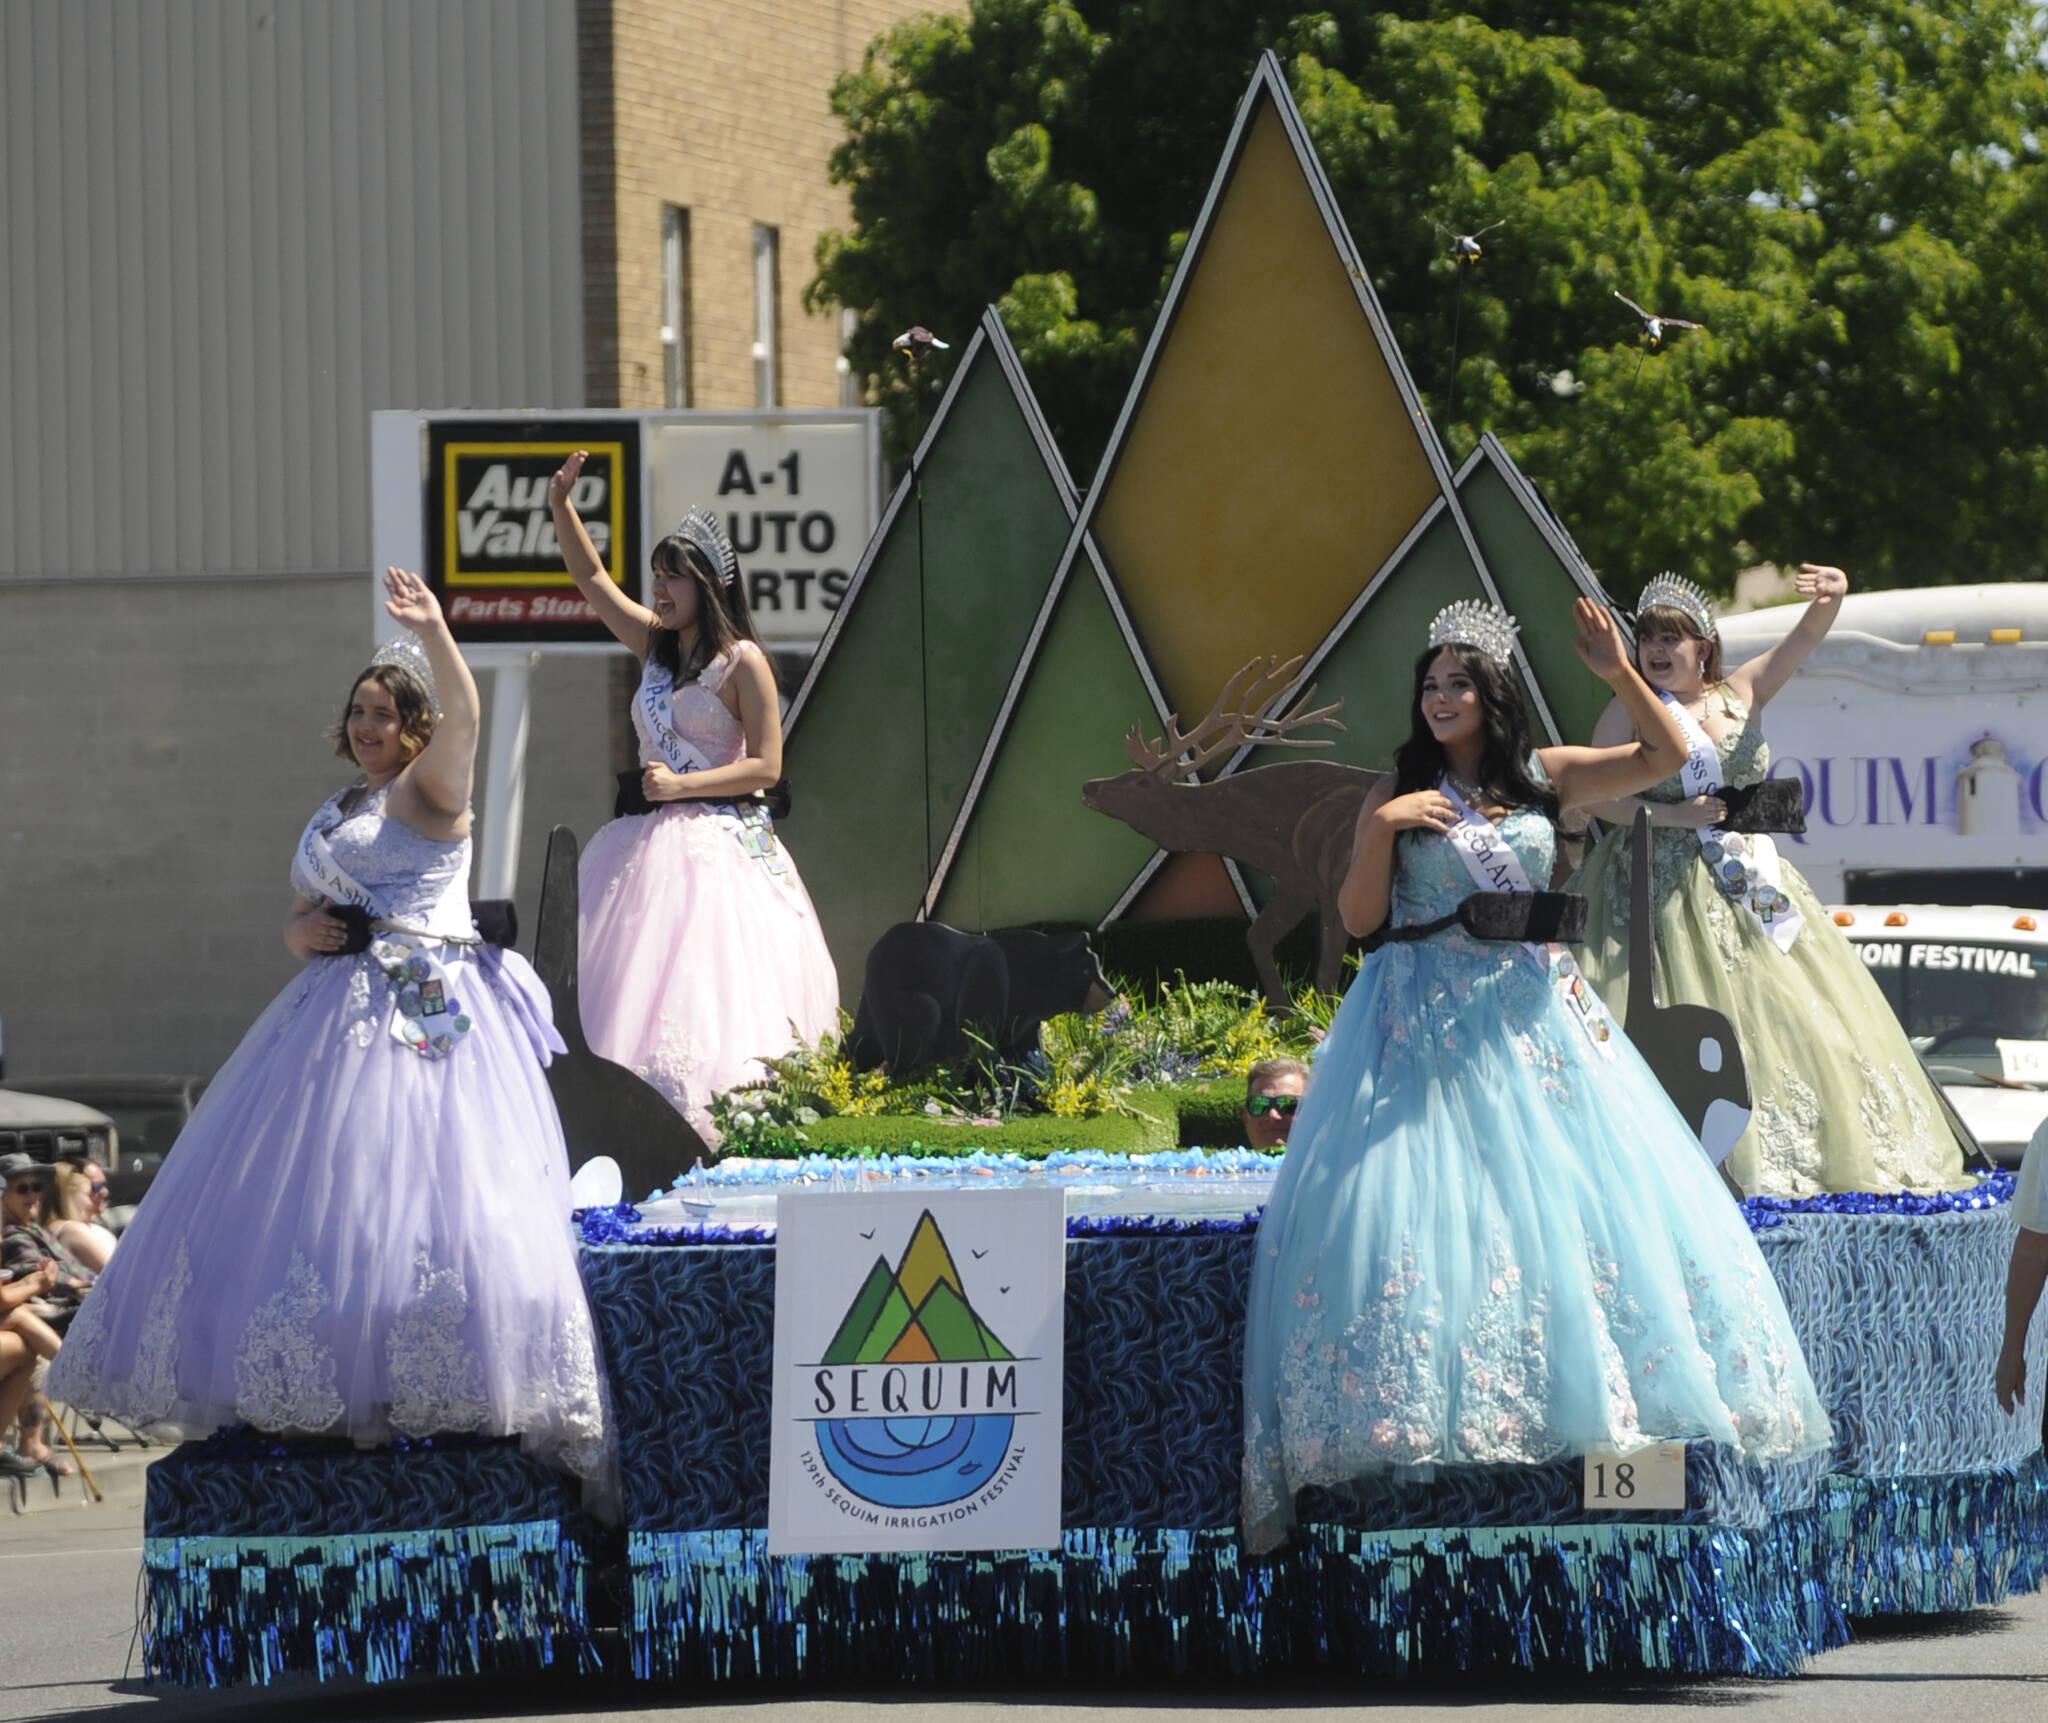 Sequim Irrigation Festival Royalty, from left, princesses Ashlynn Northaven and Kailah Blake, queen Ariya Goettling and princess Sophia Treece, wave to the Grand Parade crowd on Saturday. (Michael Dashiell/Olympic Peninsula News Group)